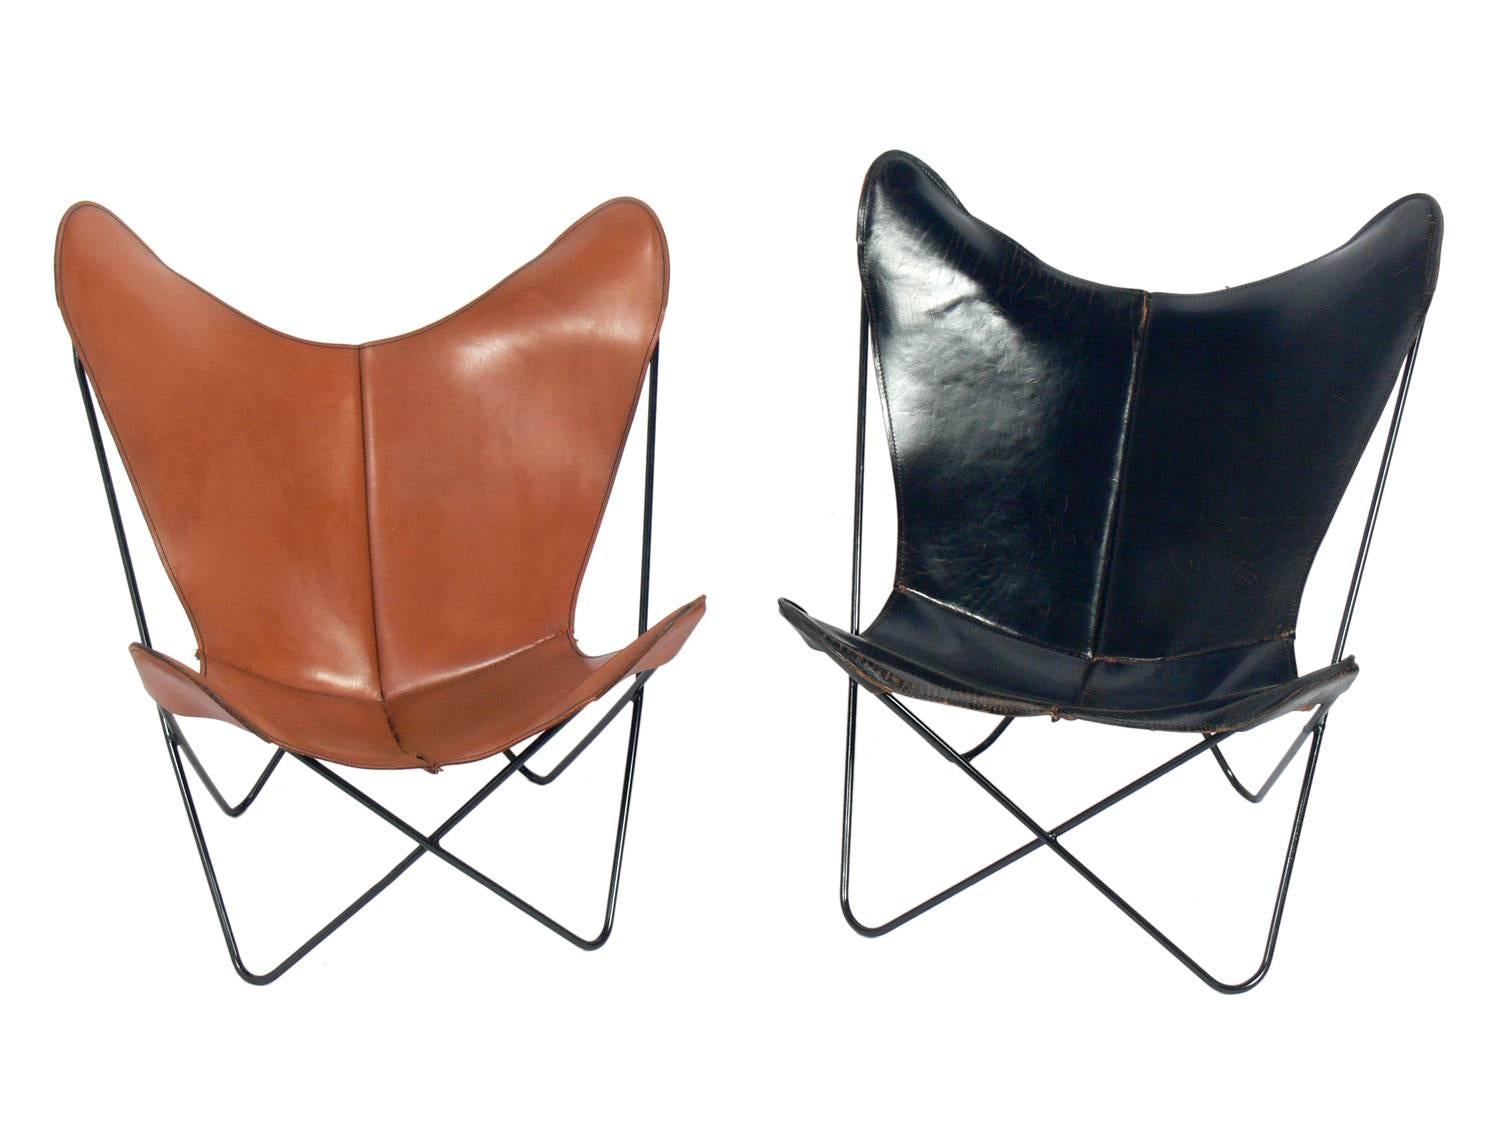 Sculptural leather Butterfly chairs designed by Jorge Ferrari-Hardoy, American, circa 1960s. The chair pictured on the left measures 35